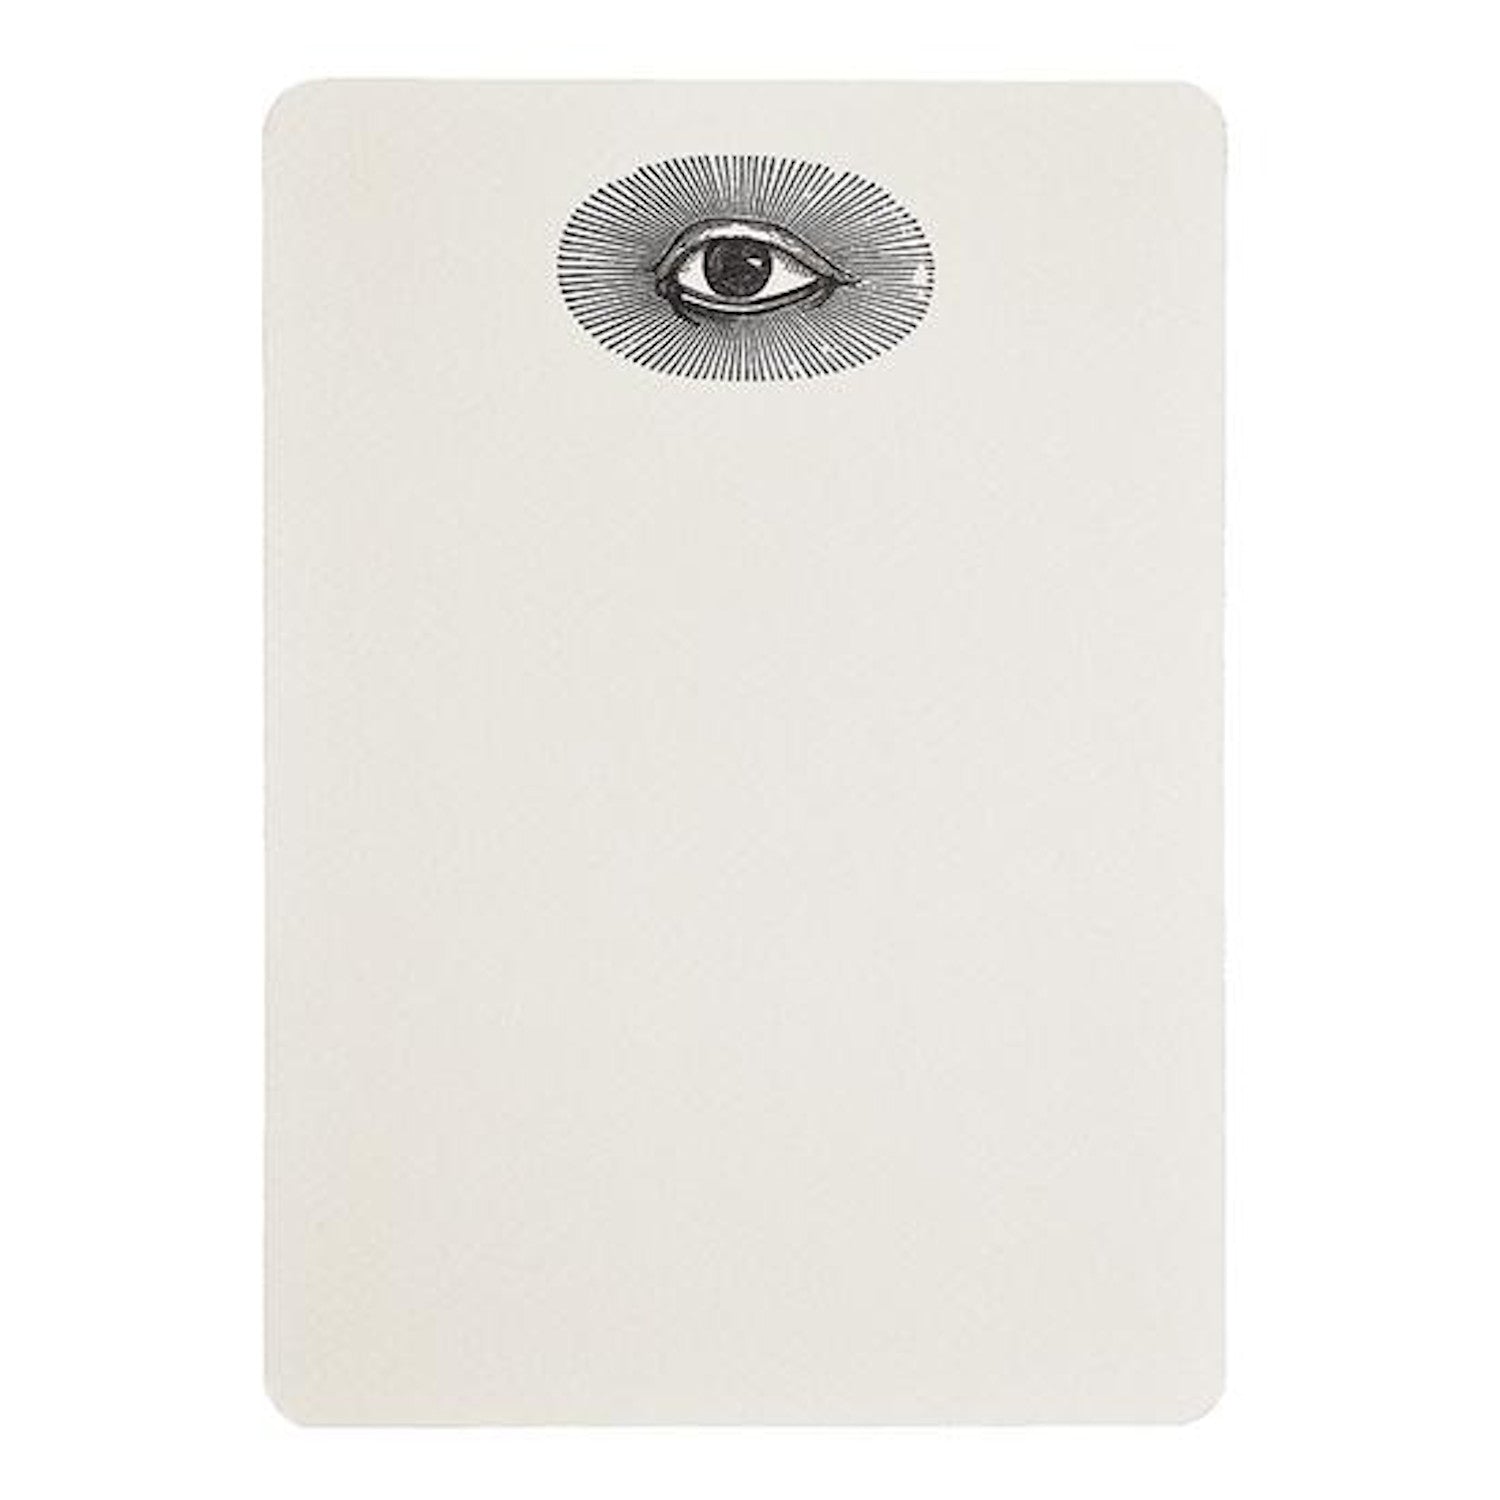 A Mystic Eye- Boxed Tails notecard featuring a single eye illustration at the top center, crafted by Folio Press &amp; Paperie.